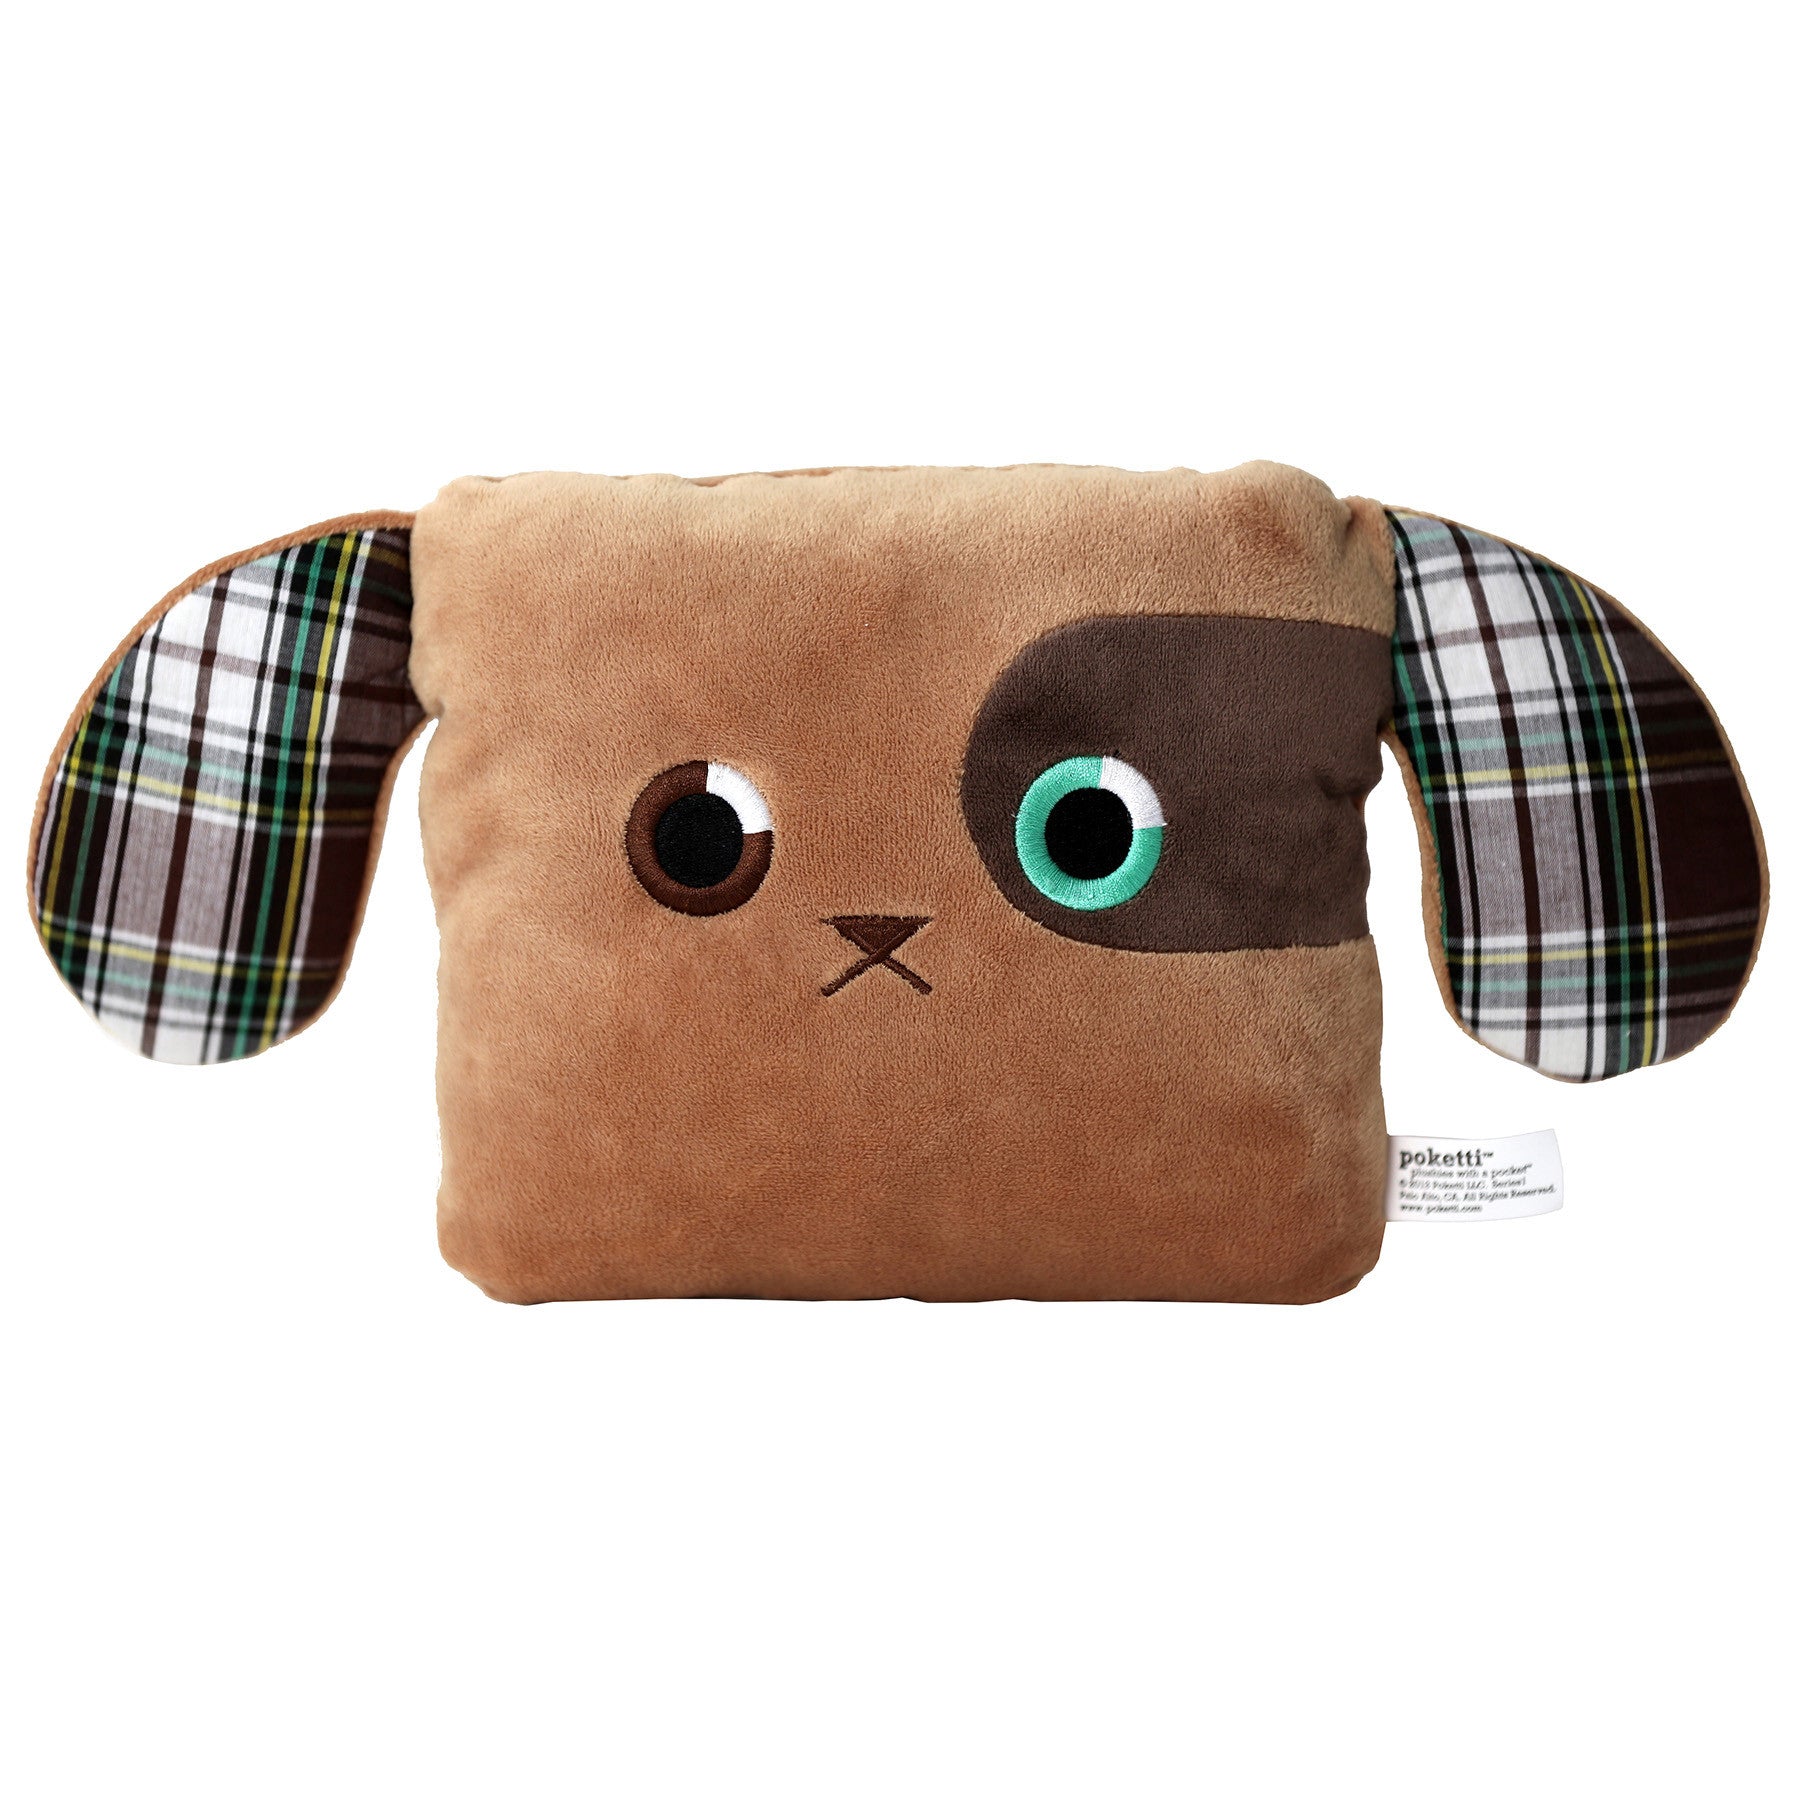 Poketti Puppy Dog Plush Pillow with a Pocket - Front